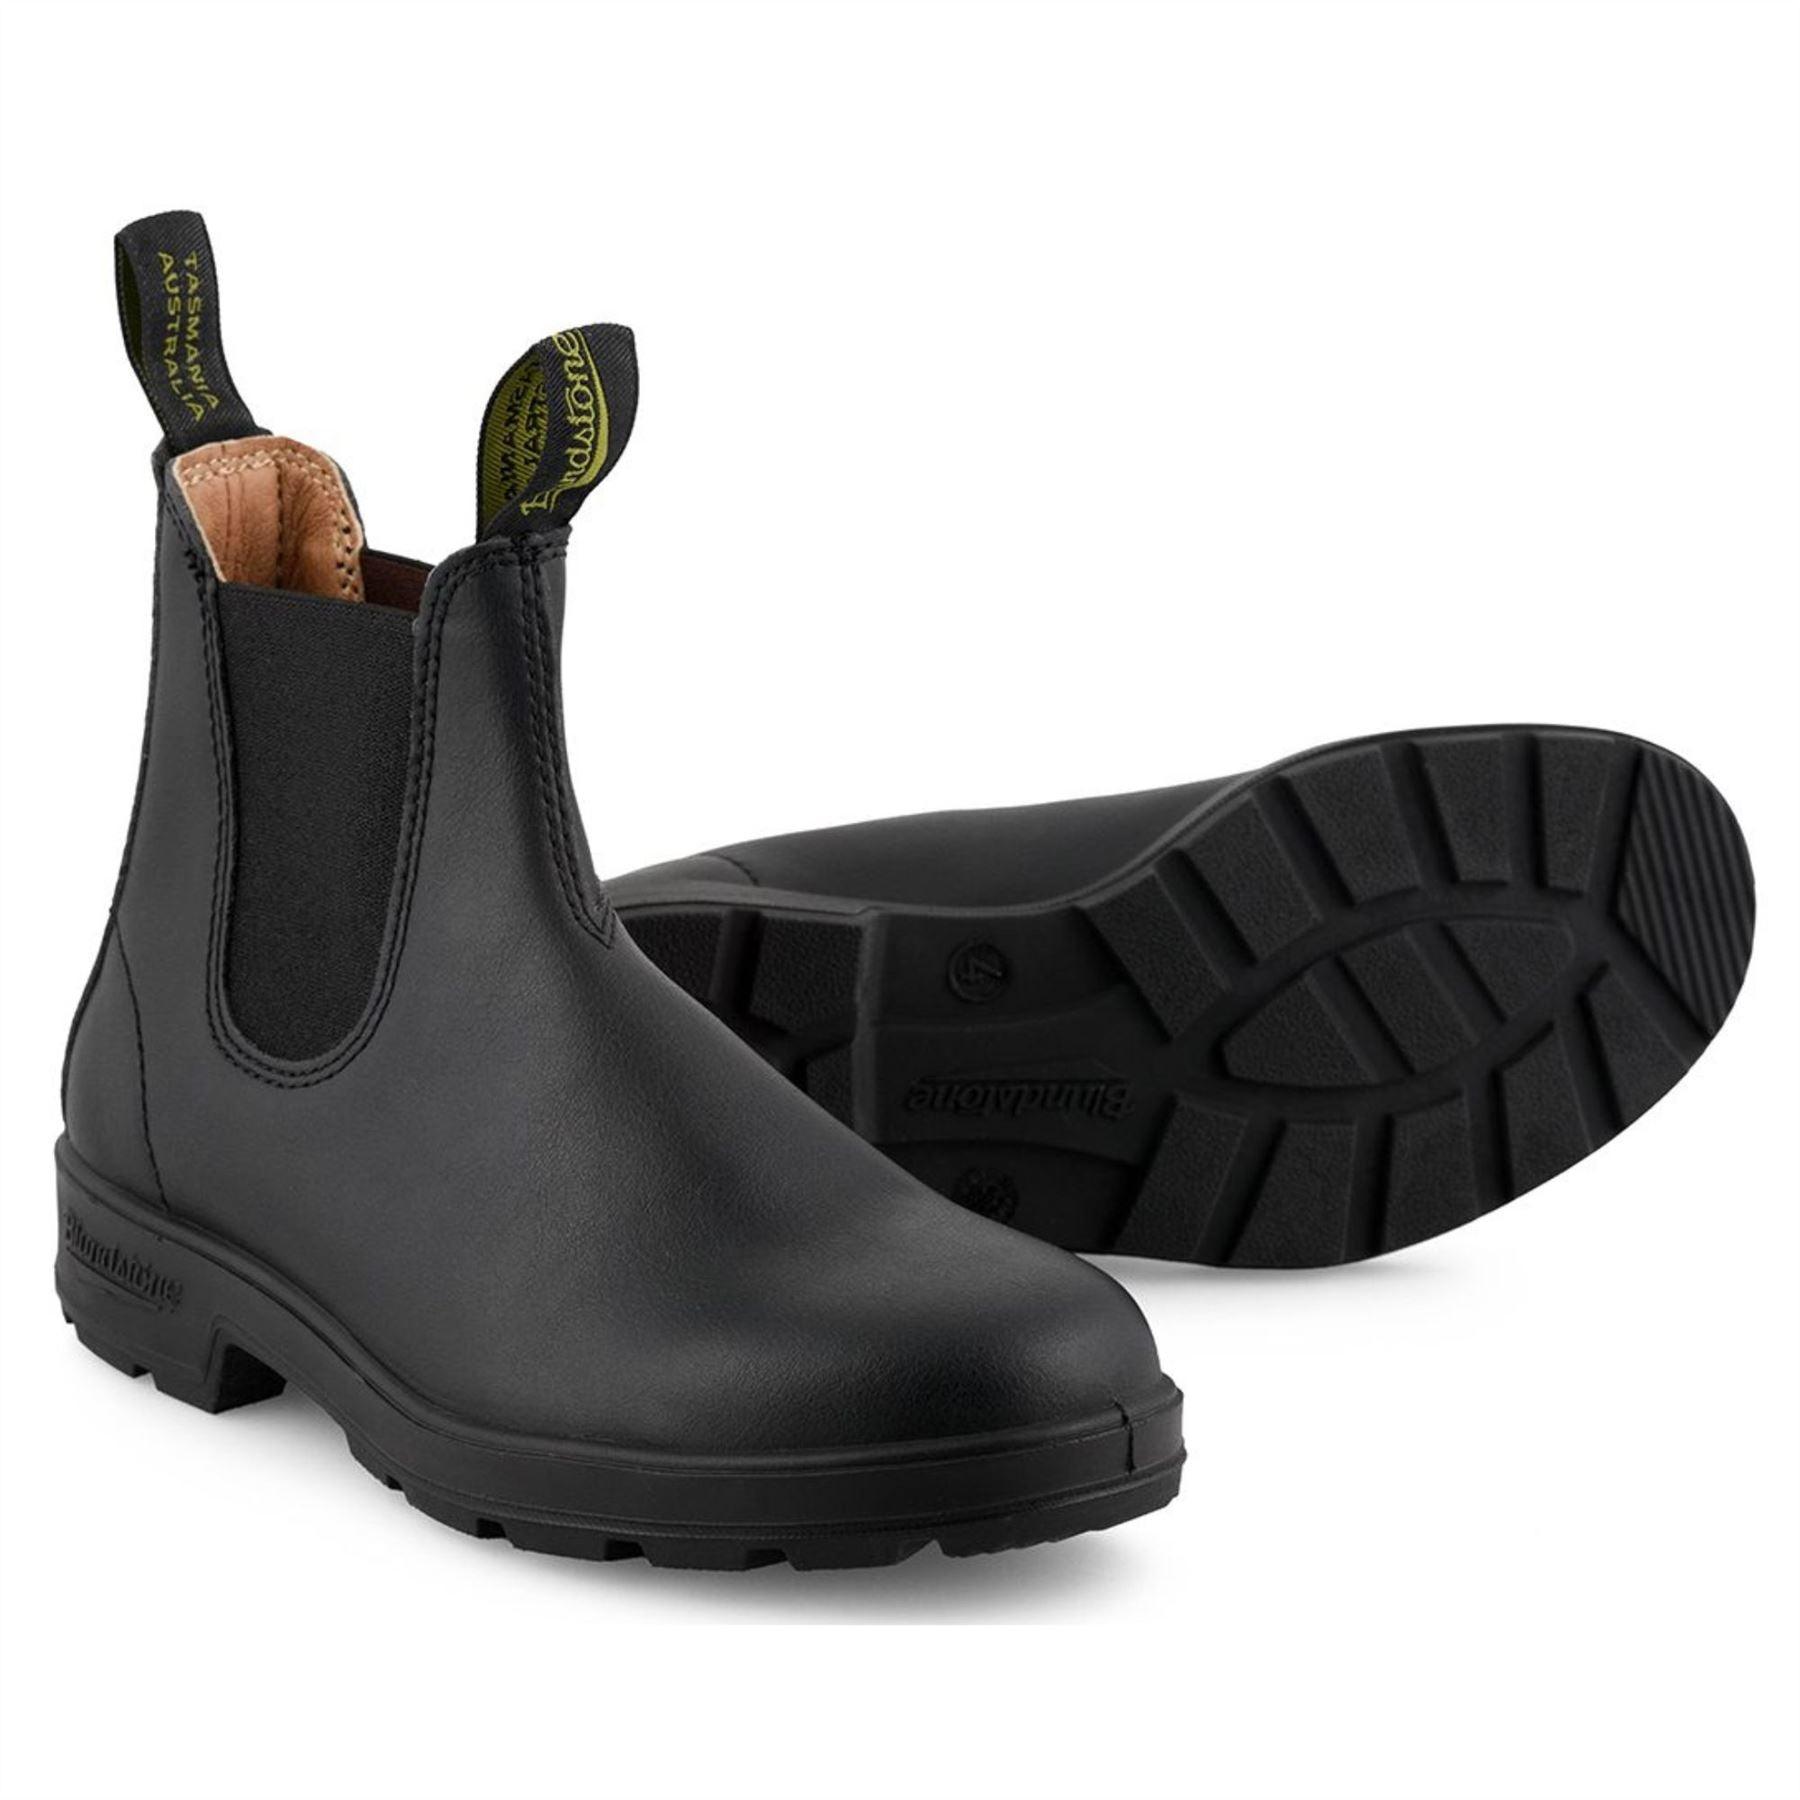 Blundstone Safety Boots